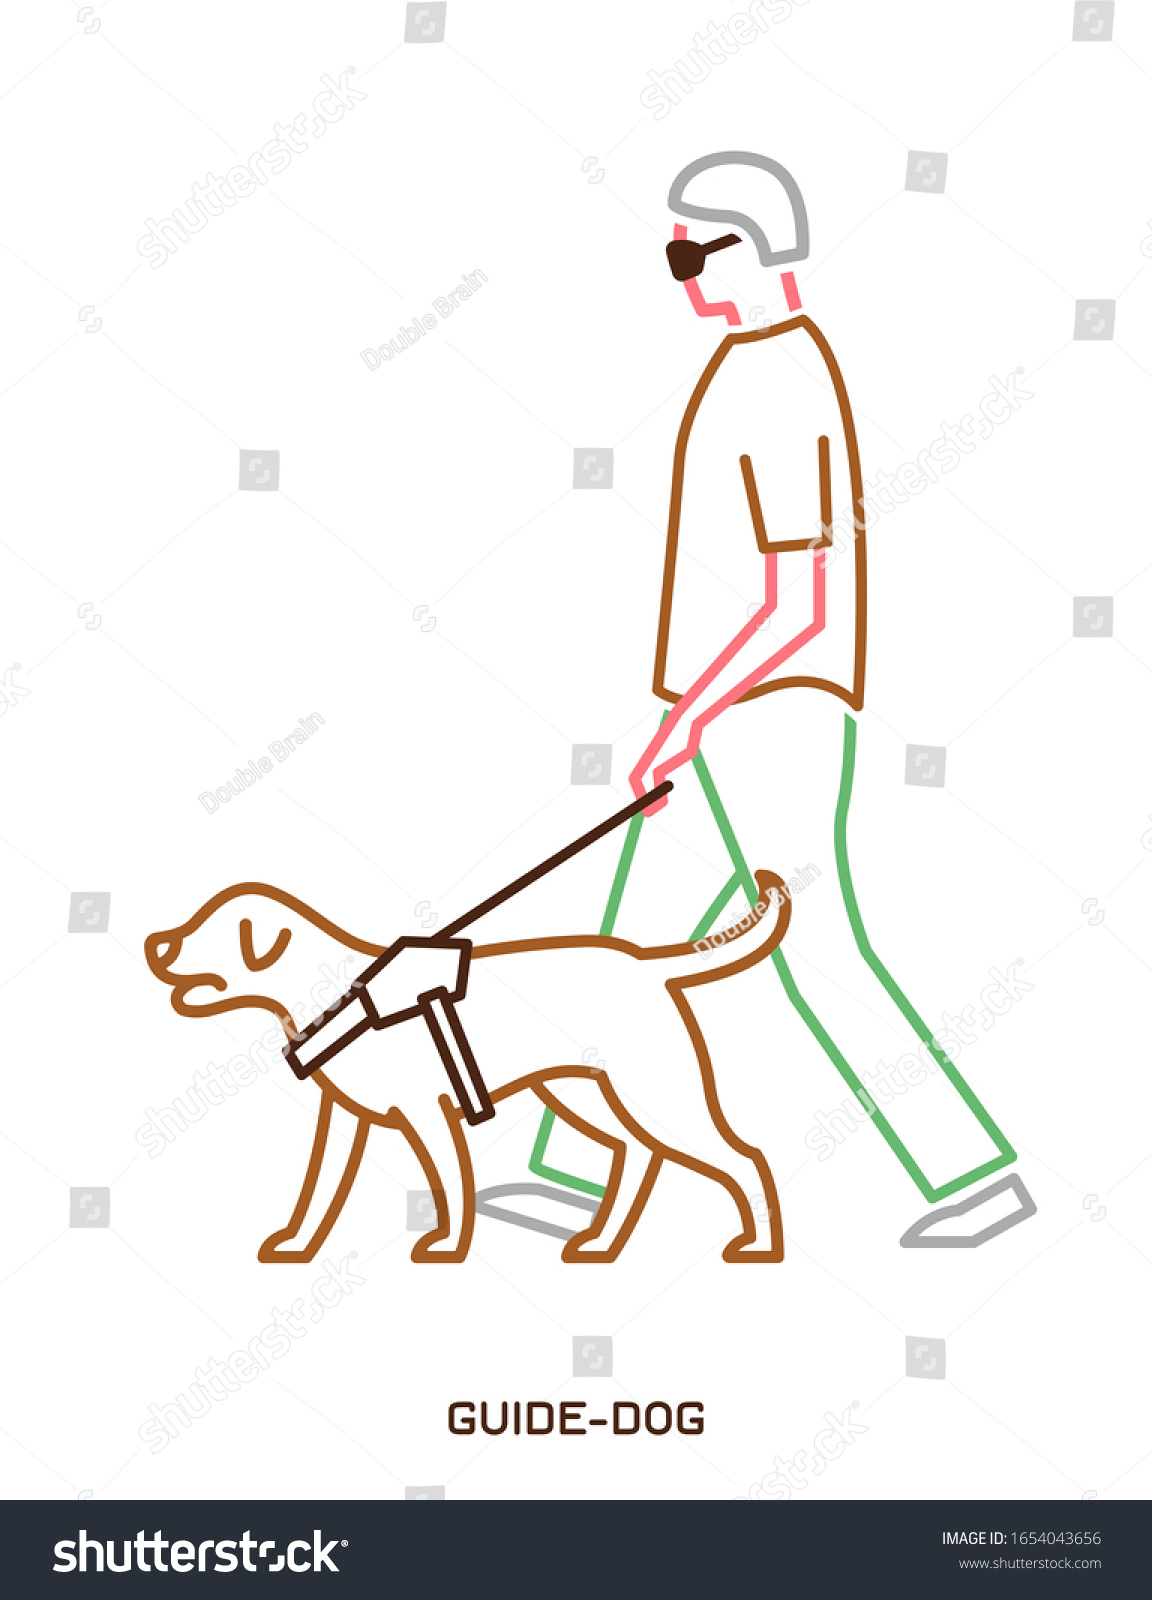 SVG of Guide dog with harness helping a disabled blind man. Support, assistance animal. Physically handicapped person. Simple icon, symbol, pictogram, sign. Vector illustration isolated on white background. svg